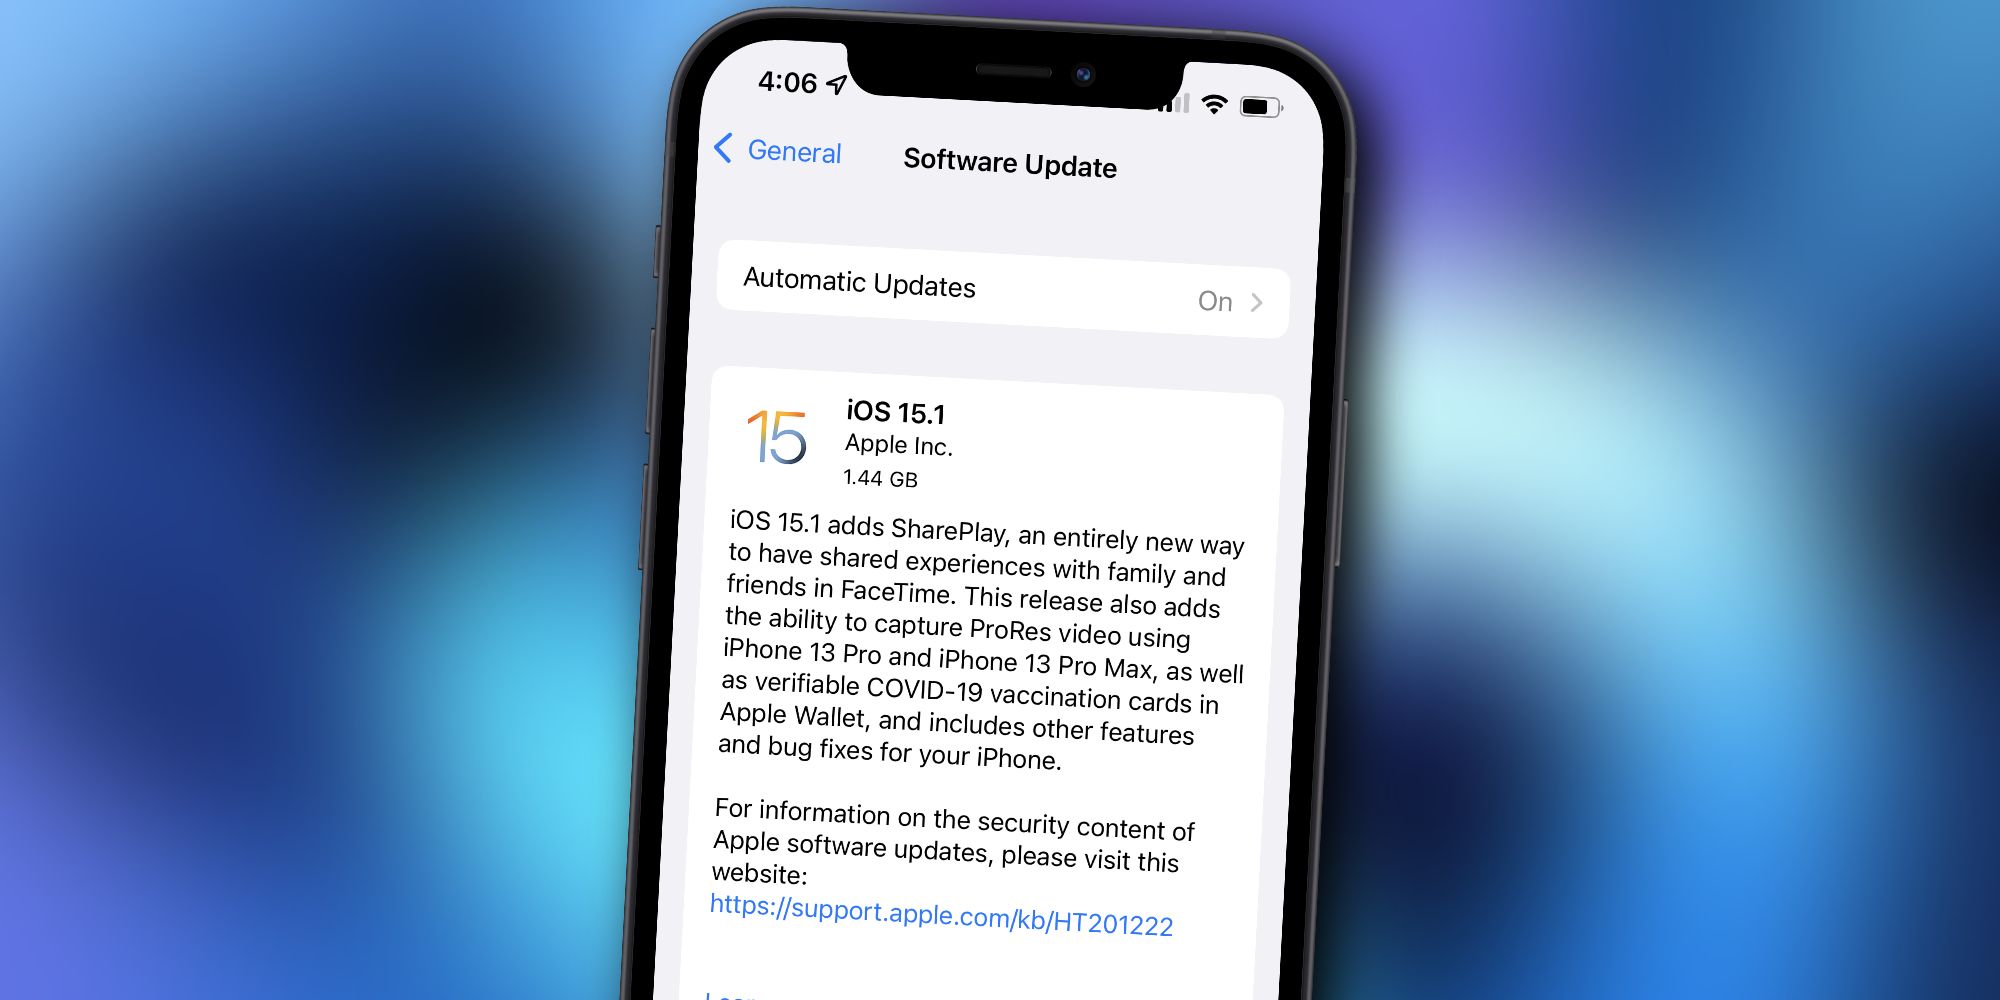 iOS 15.1 update on an iPhone